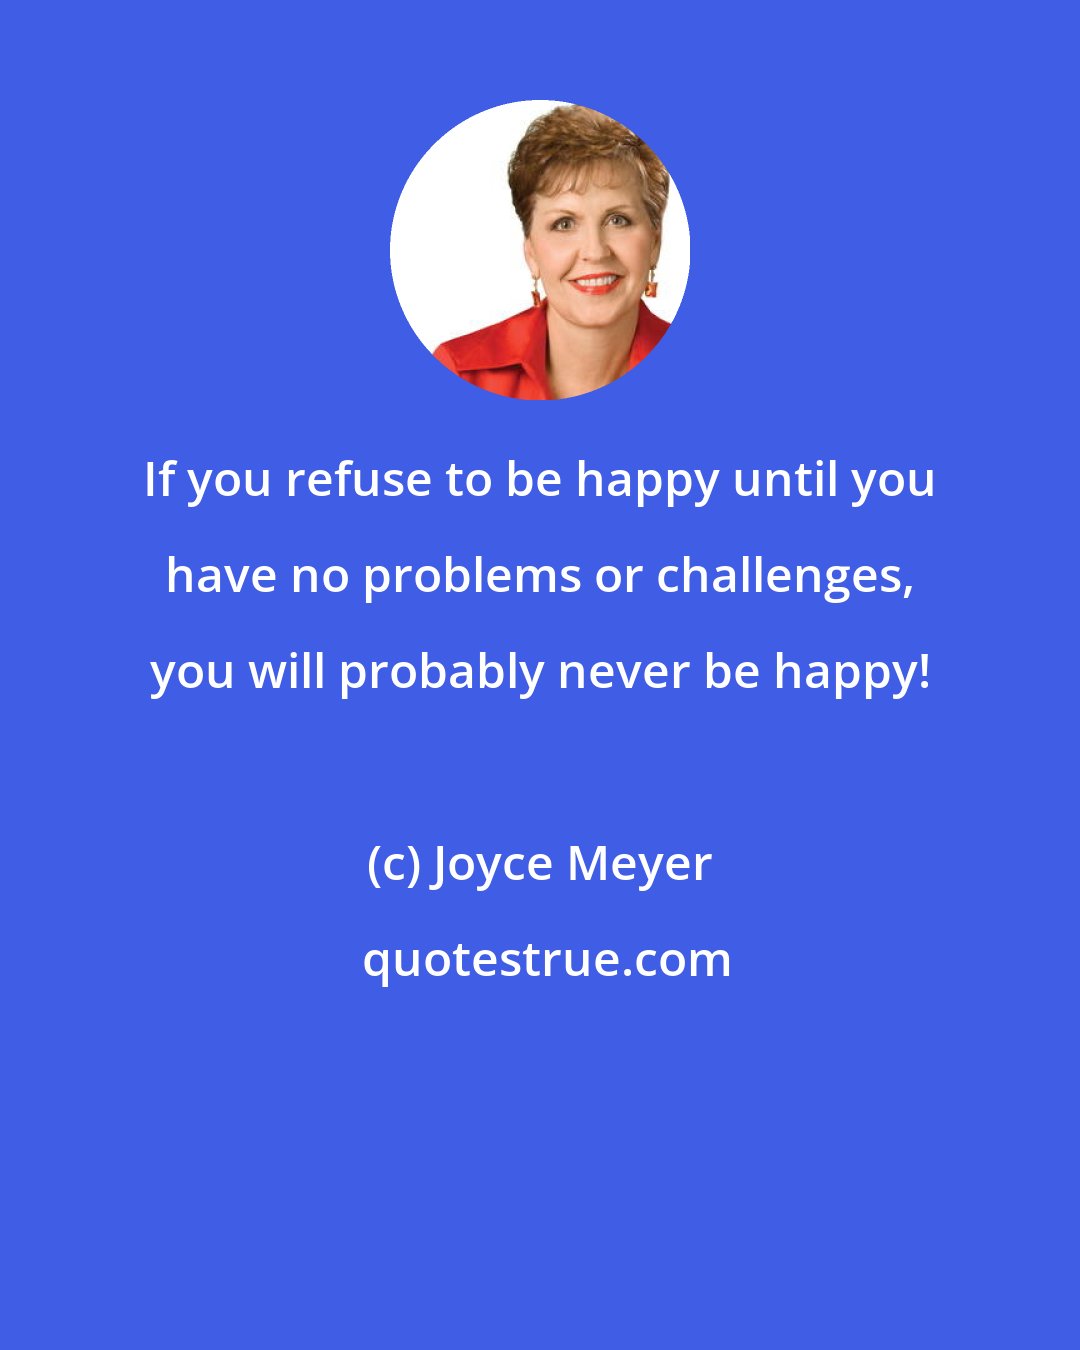 Joyce Meyer: If you refuse to be happy until you have no problems or challenges, you will probably never be happy!